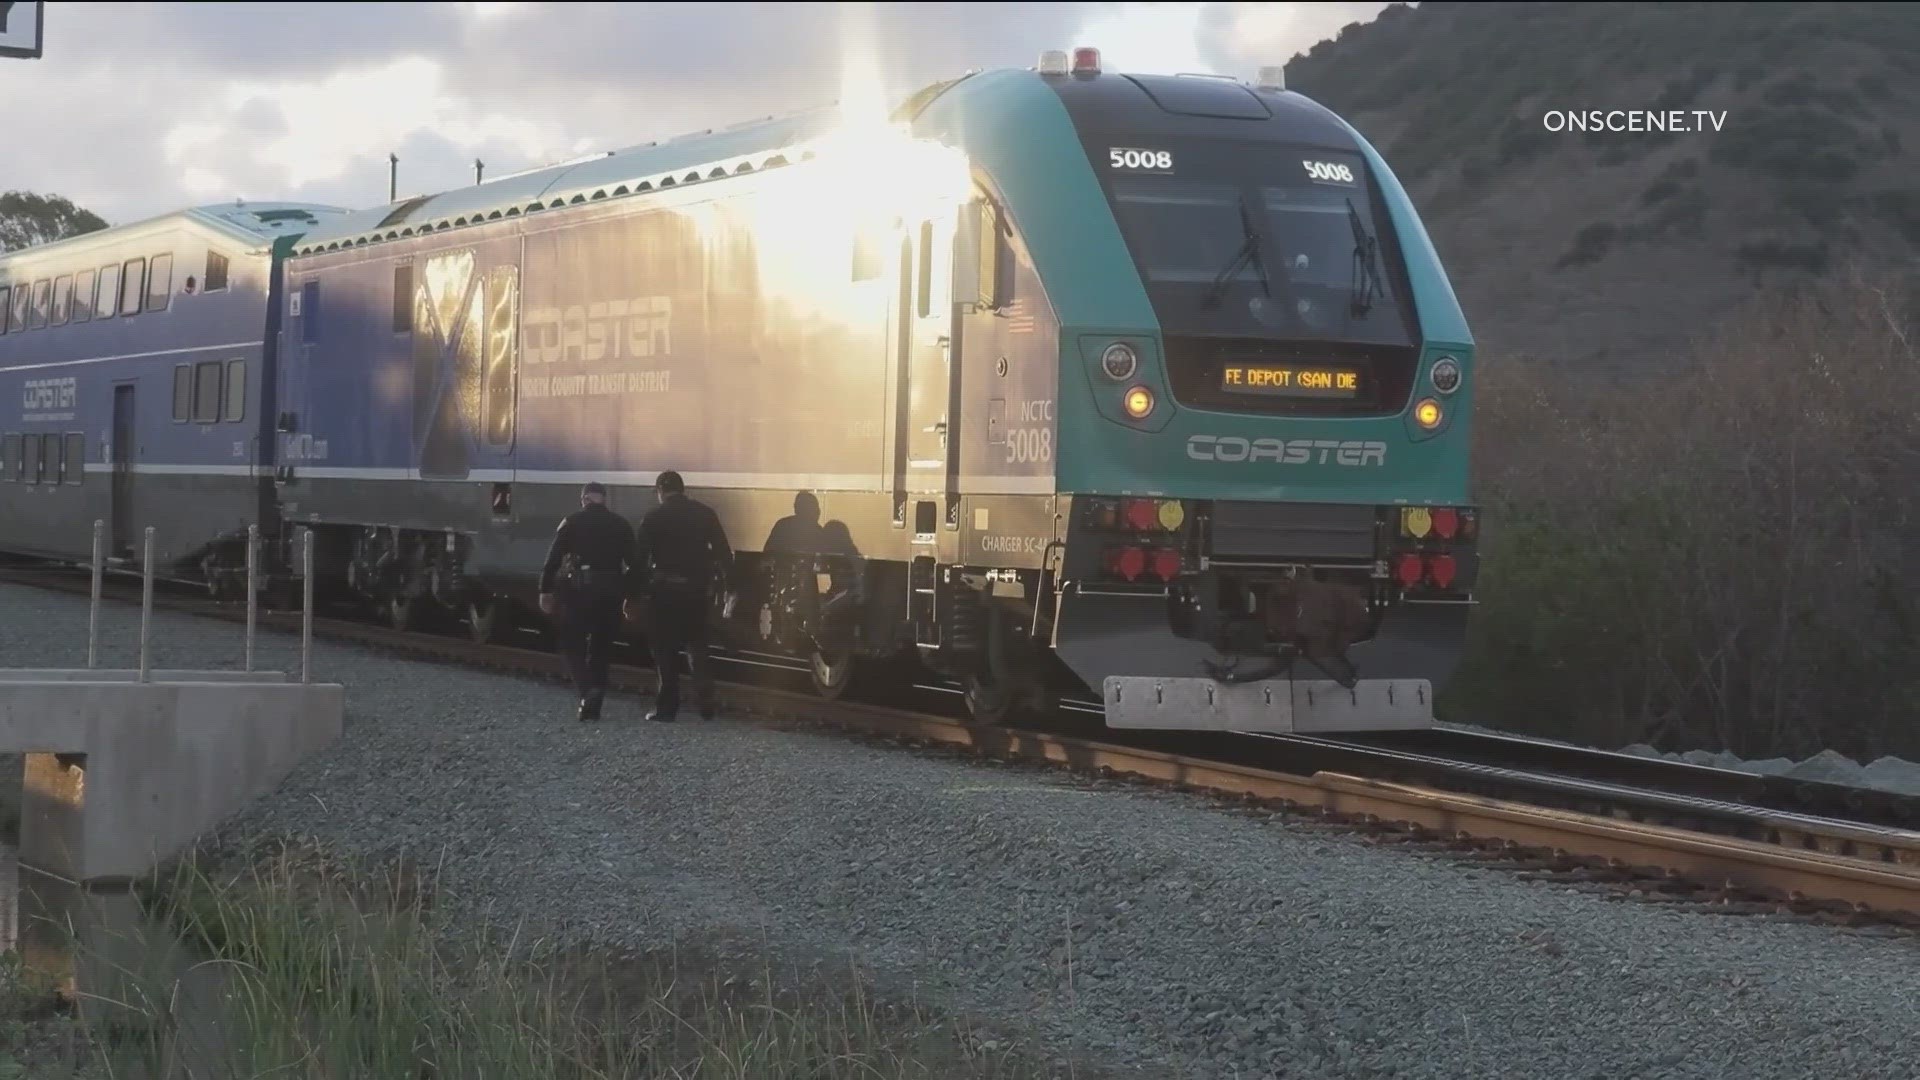 The San Diego County Sheriff's Department says a man believed to be walking his dog was hit by a North County Transit District Coaster train.